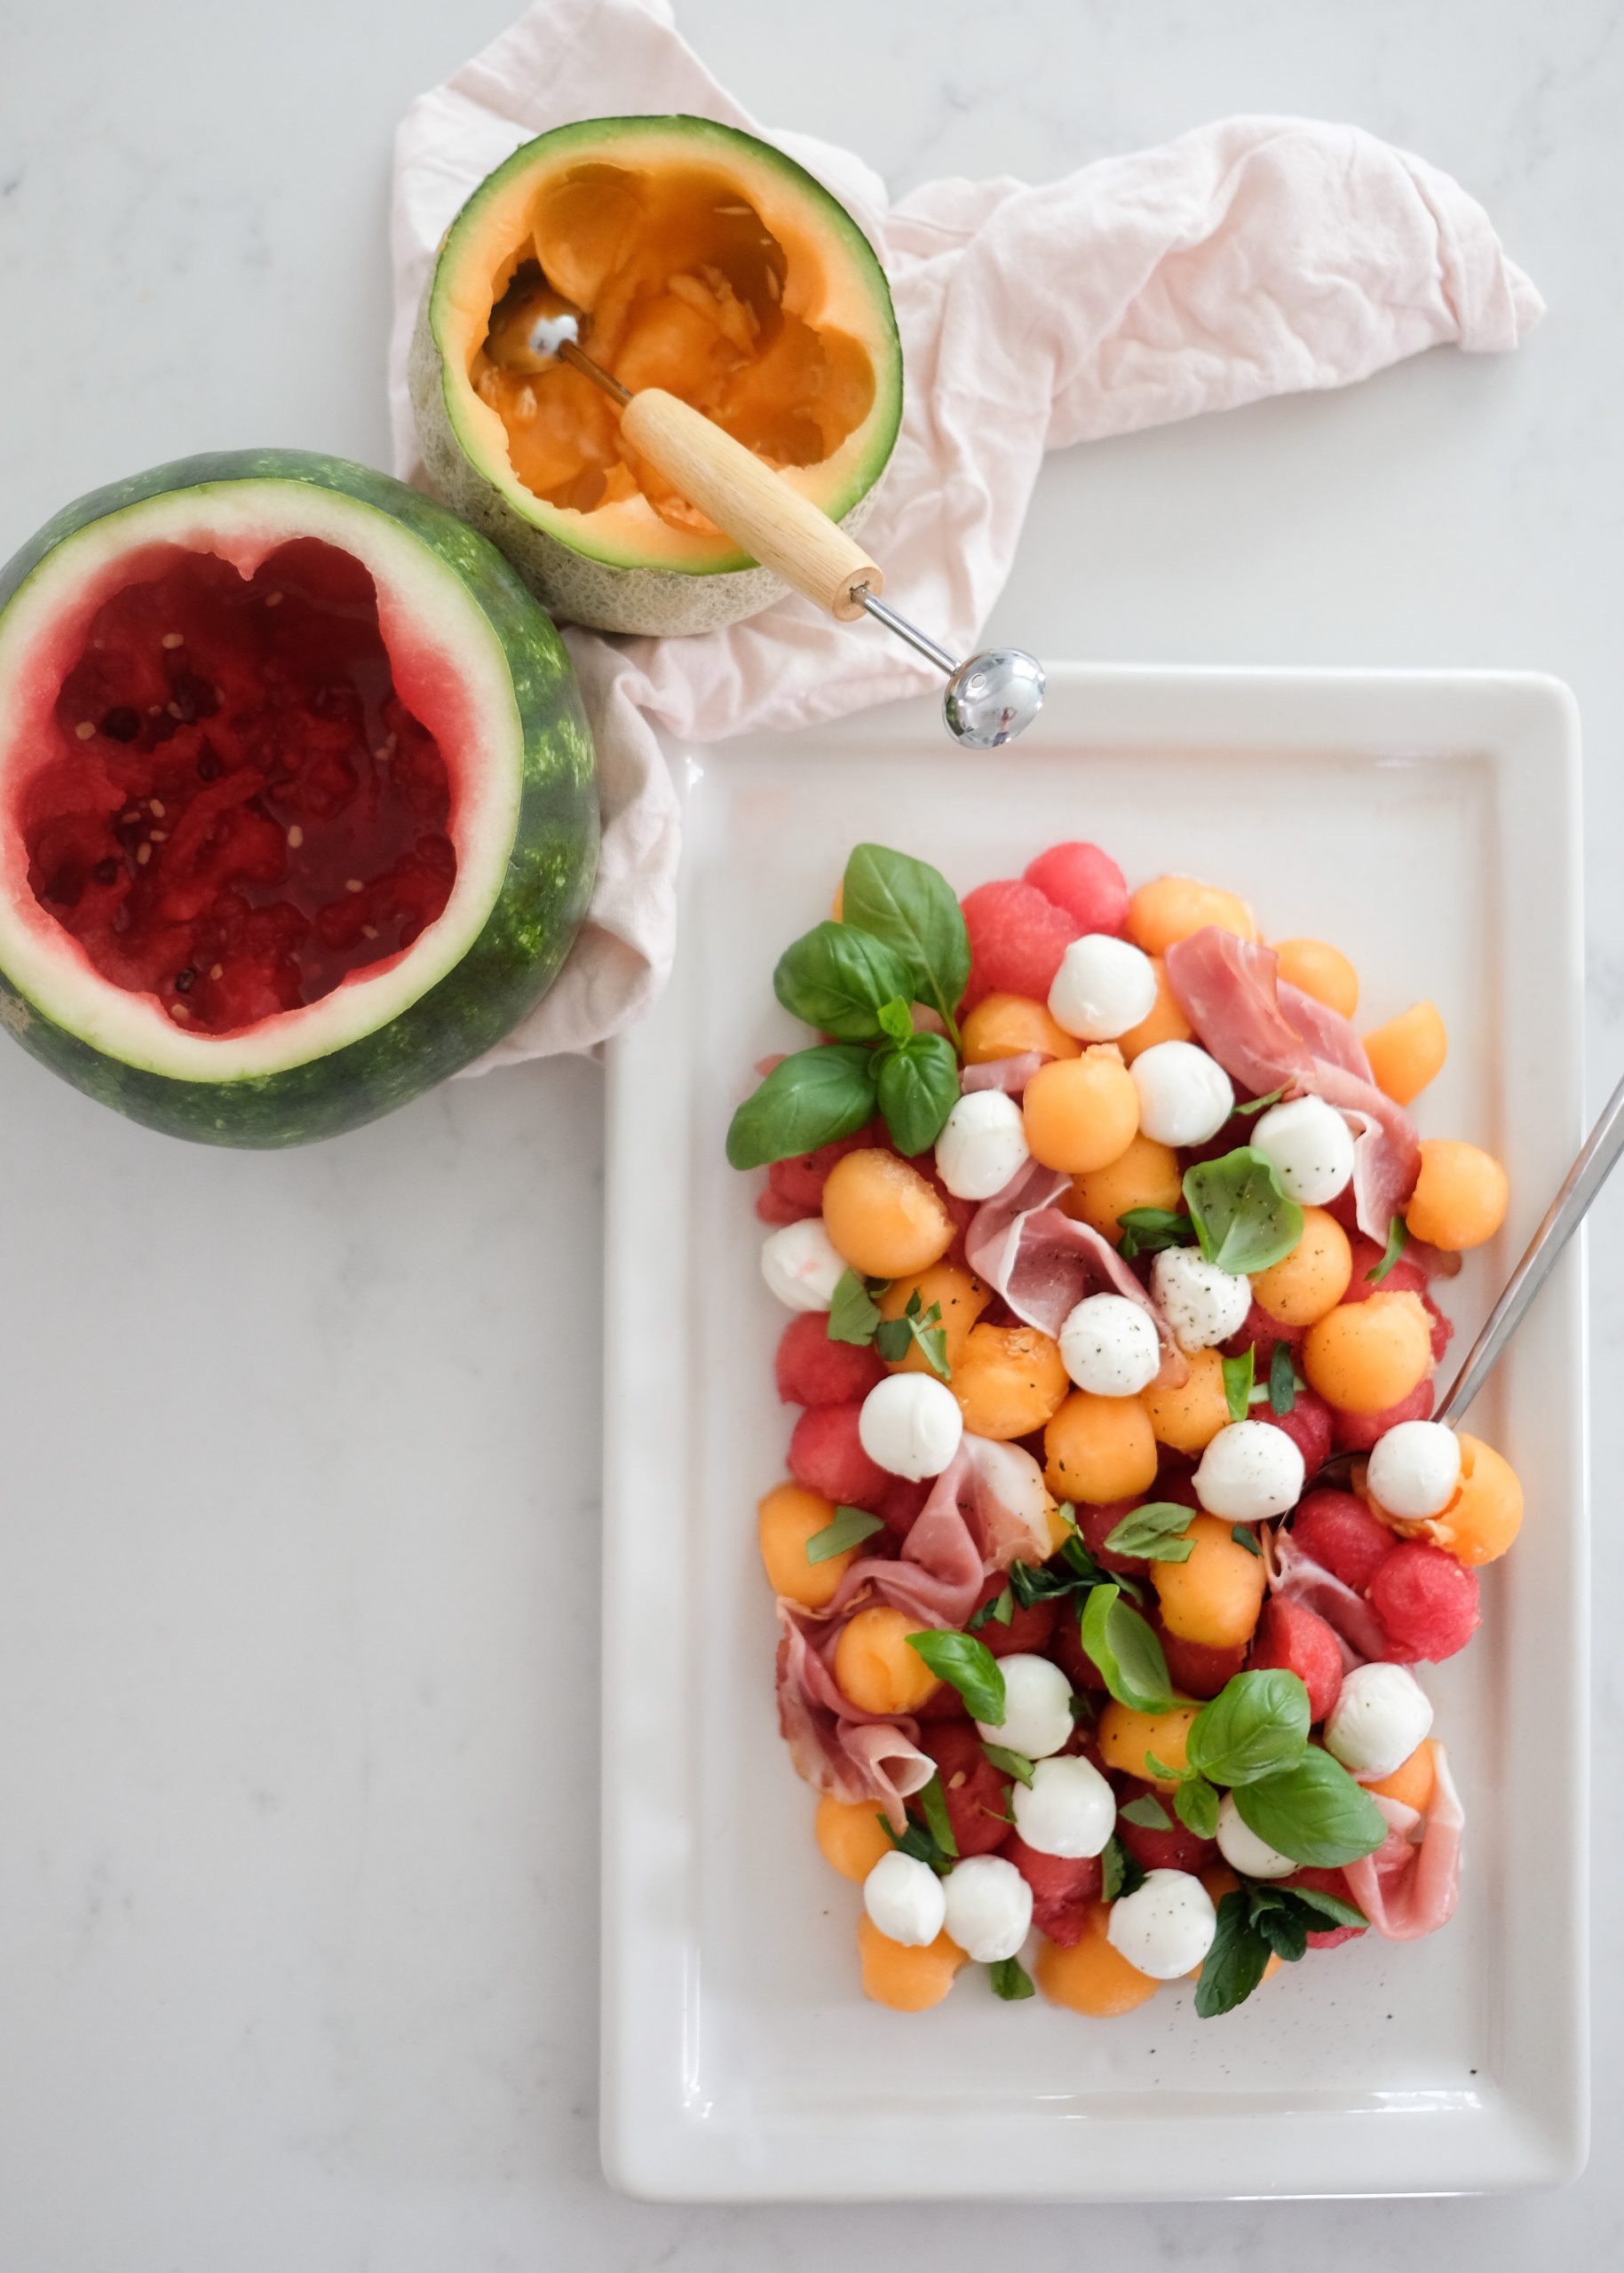 Food Blogger Chocolate and Lace shares her recipe for Melon and Prosciutto Salad